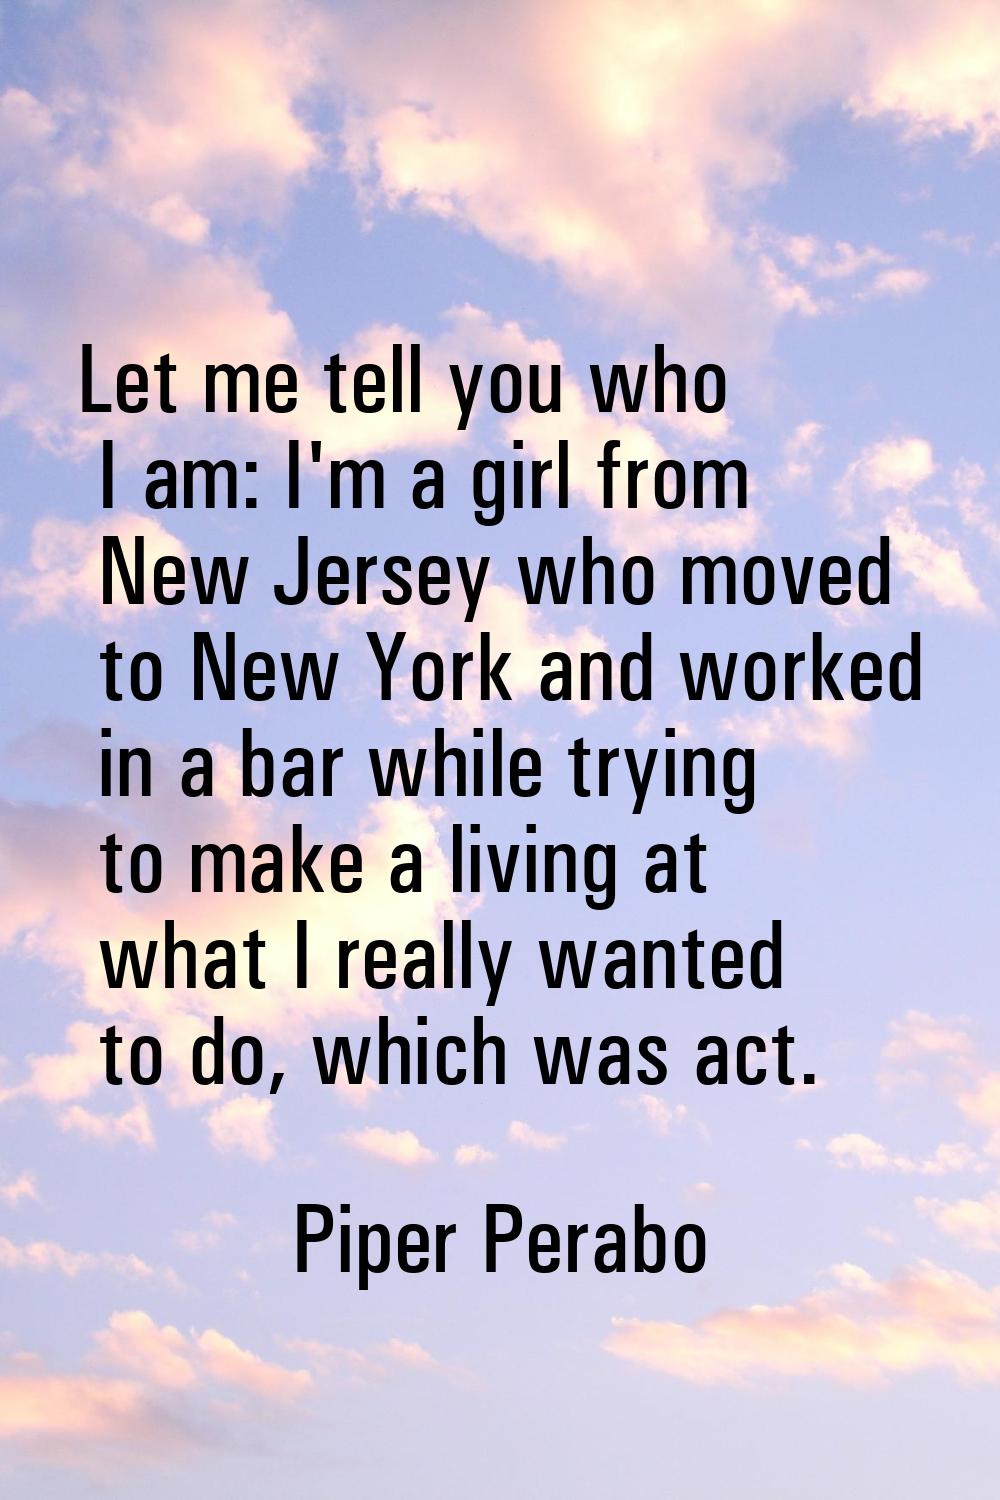 Let me tell you who I am: I'm a girl from New Jersey who moved to New York and worked in a bar whil